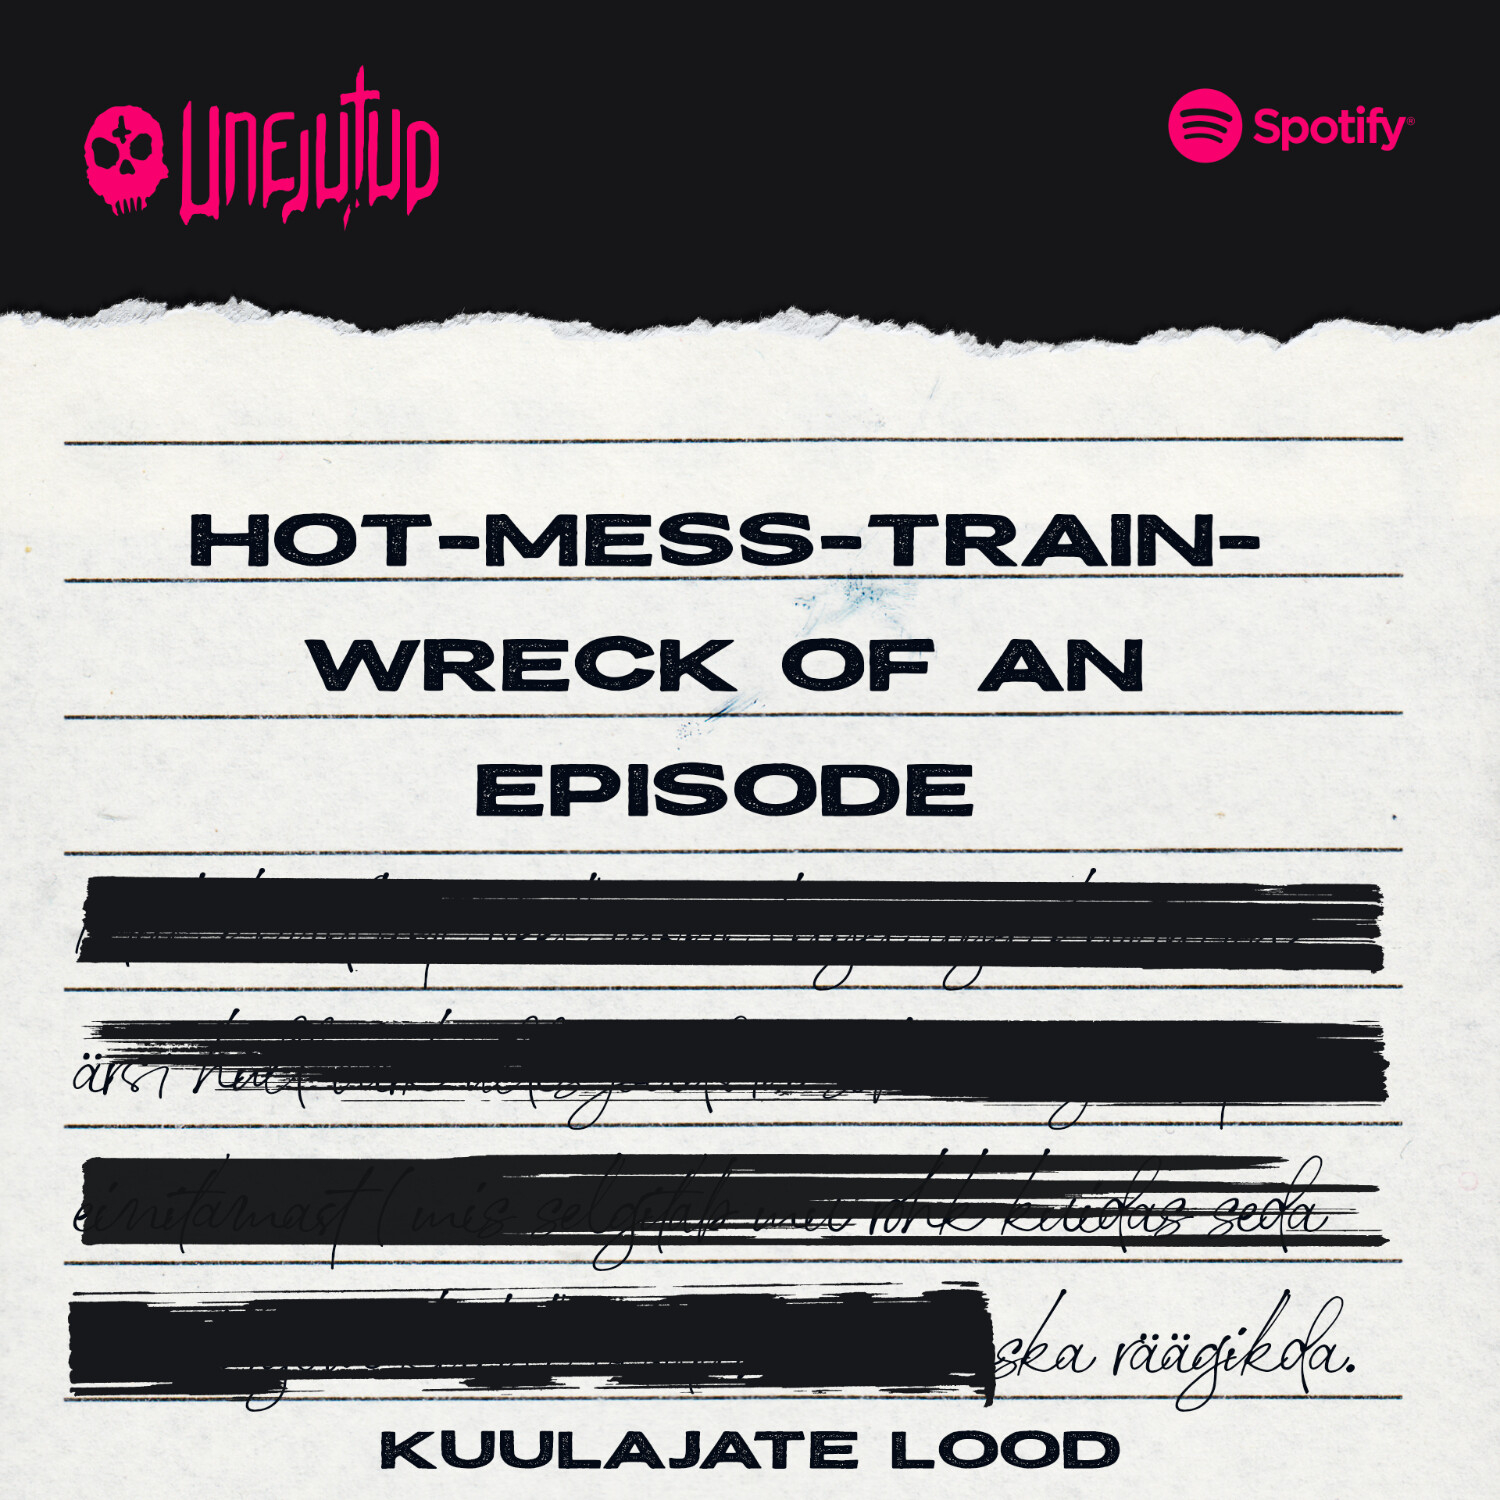 Unejutud: Kuulajate lood - Hot-mess- train-wreck of an episode